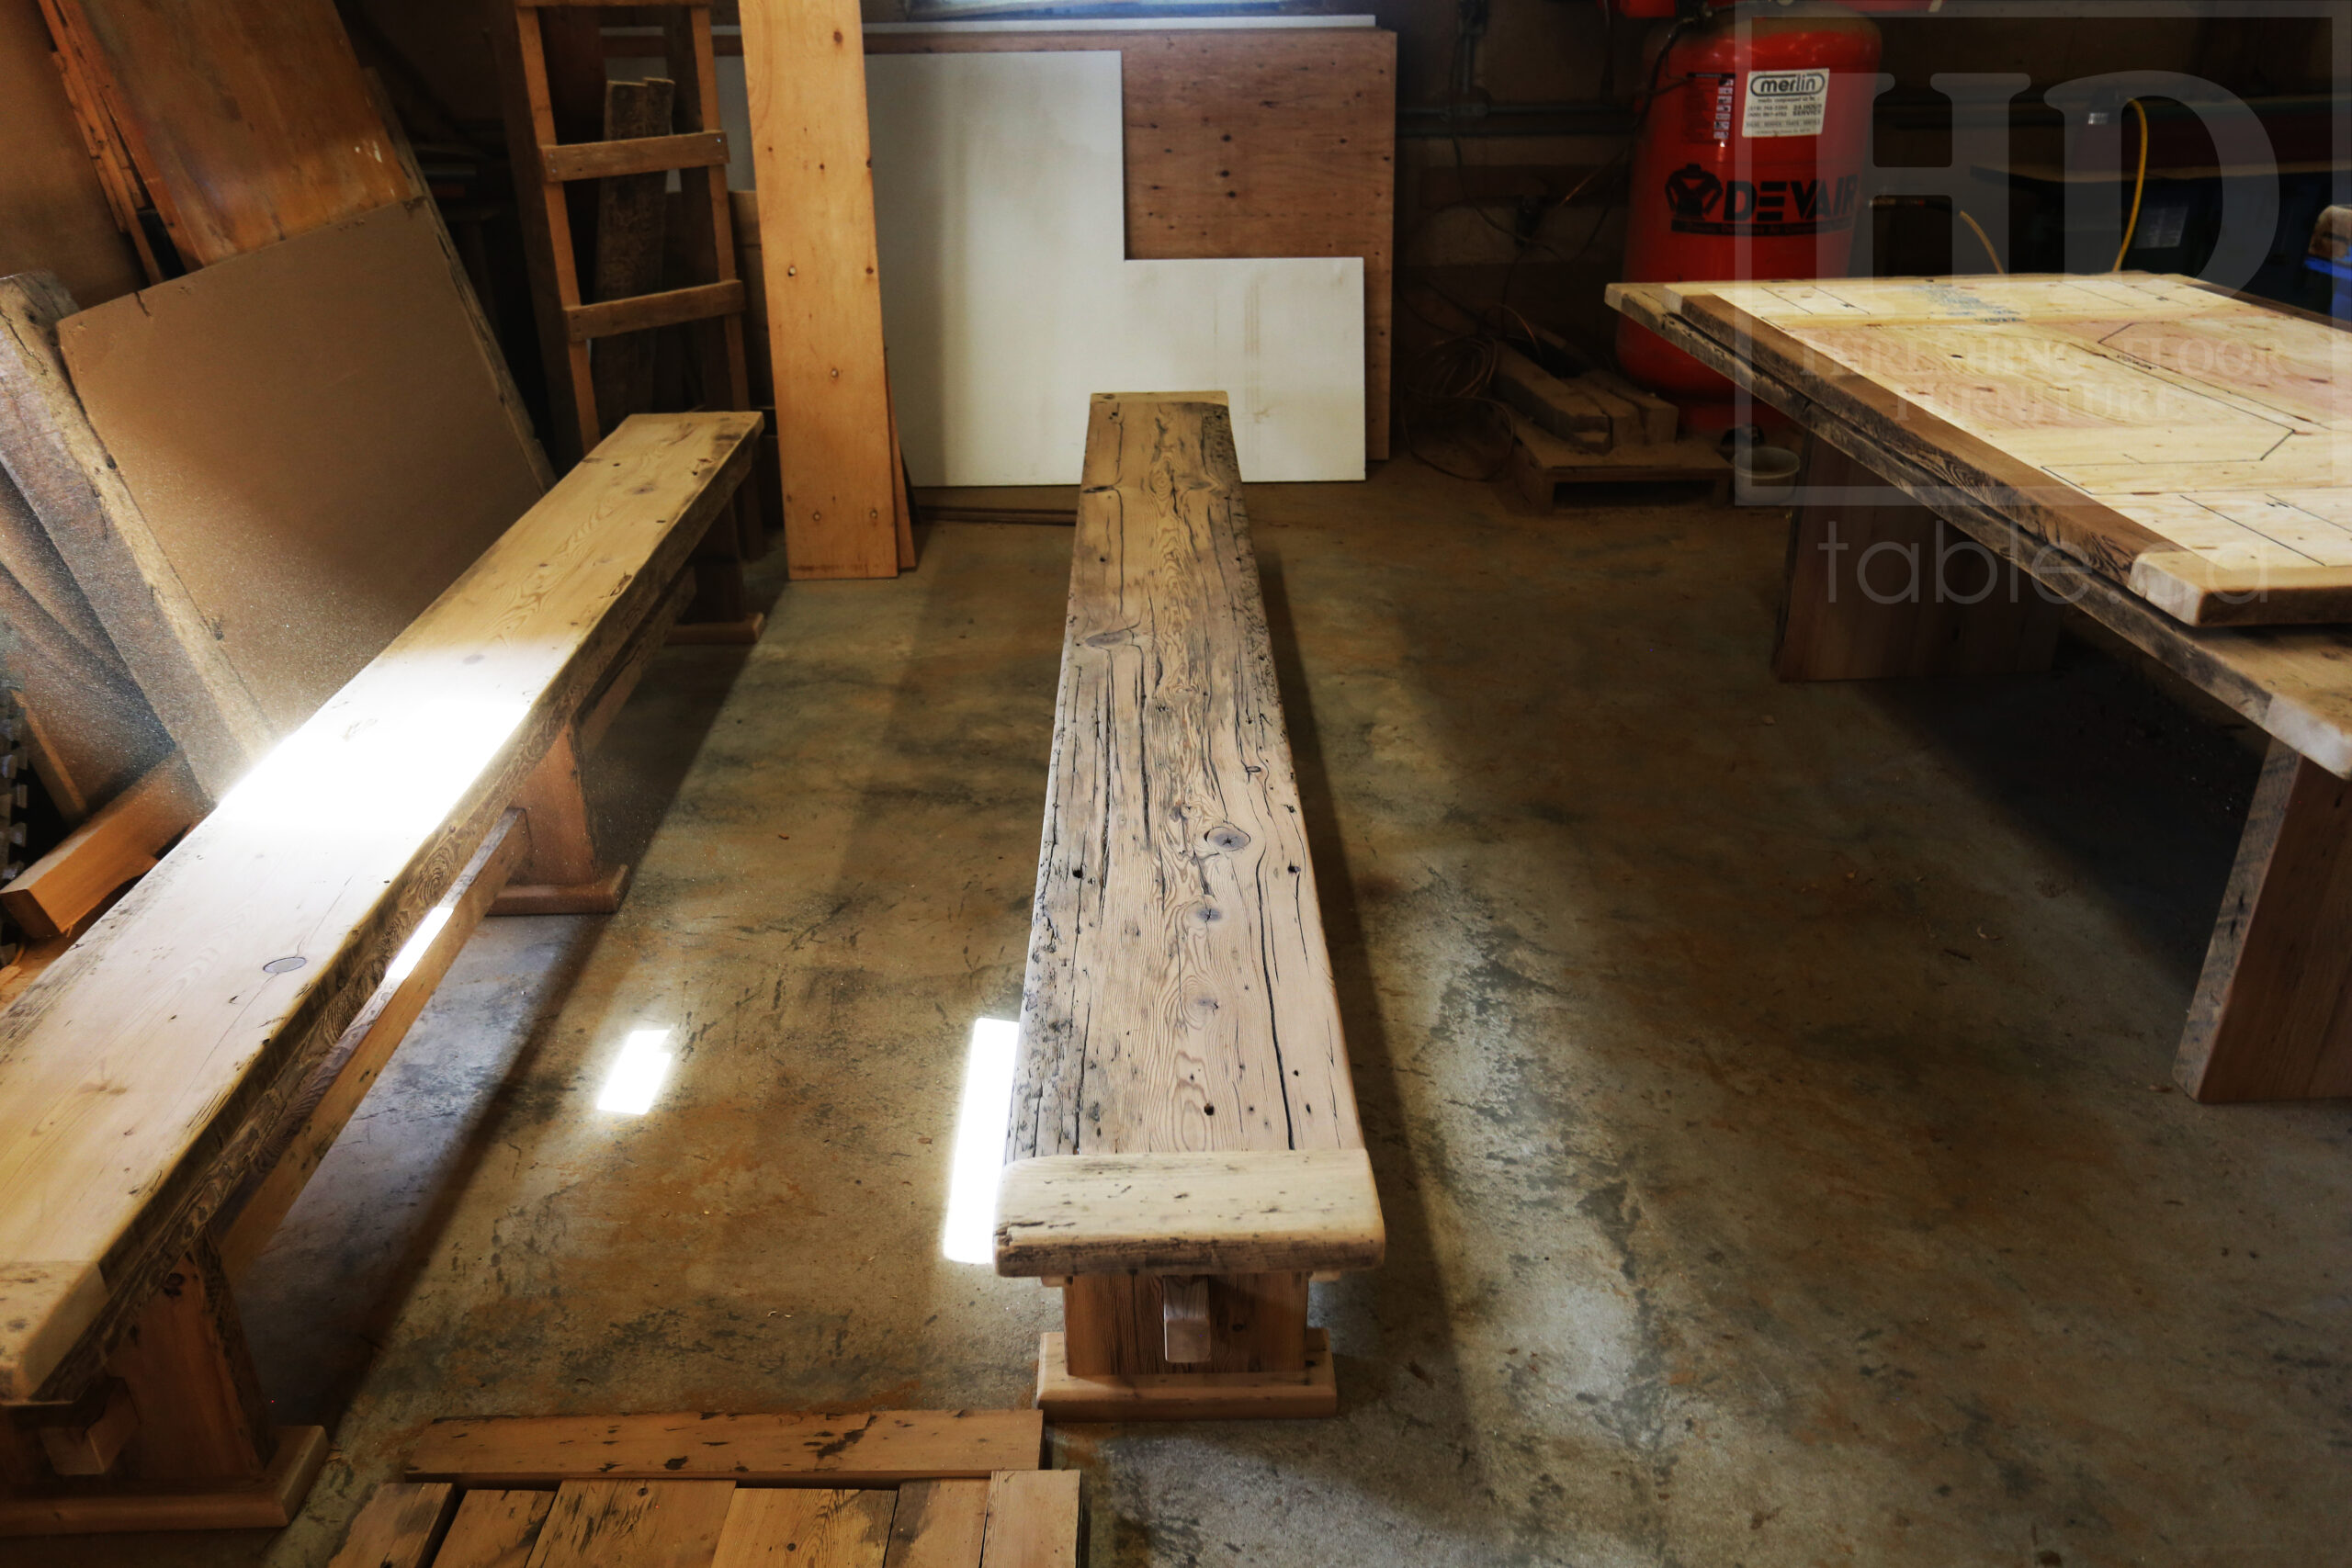 10’ Ontario Barnwood Table we made for a Norwich, Ontario Home – 48” wide – Trestle Base - Old Growth Reclaimed Hemlock Threshing Floor Construction – Original edges & distressing maintained – Greytone Option - Premium epoxy + satin polyurethane finish – [Two] Matching Trestle Benches - www.table.ca